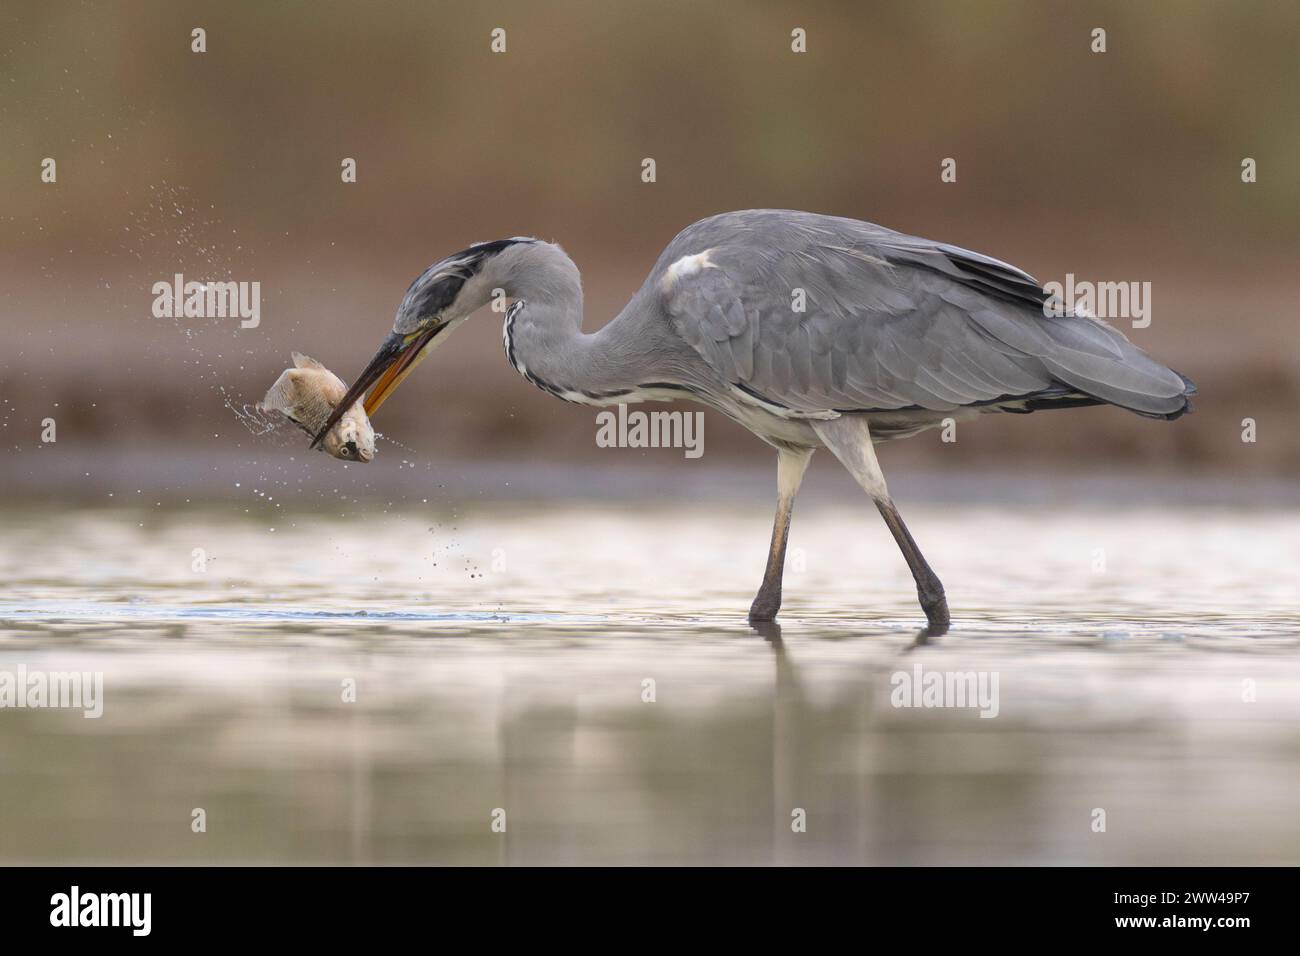 Grey heron (Ardea cinerea) fishing in a water pond. This large bird hunts in lakes, rivers and marshes, catching fish or small animals with a darting Stock Photo